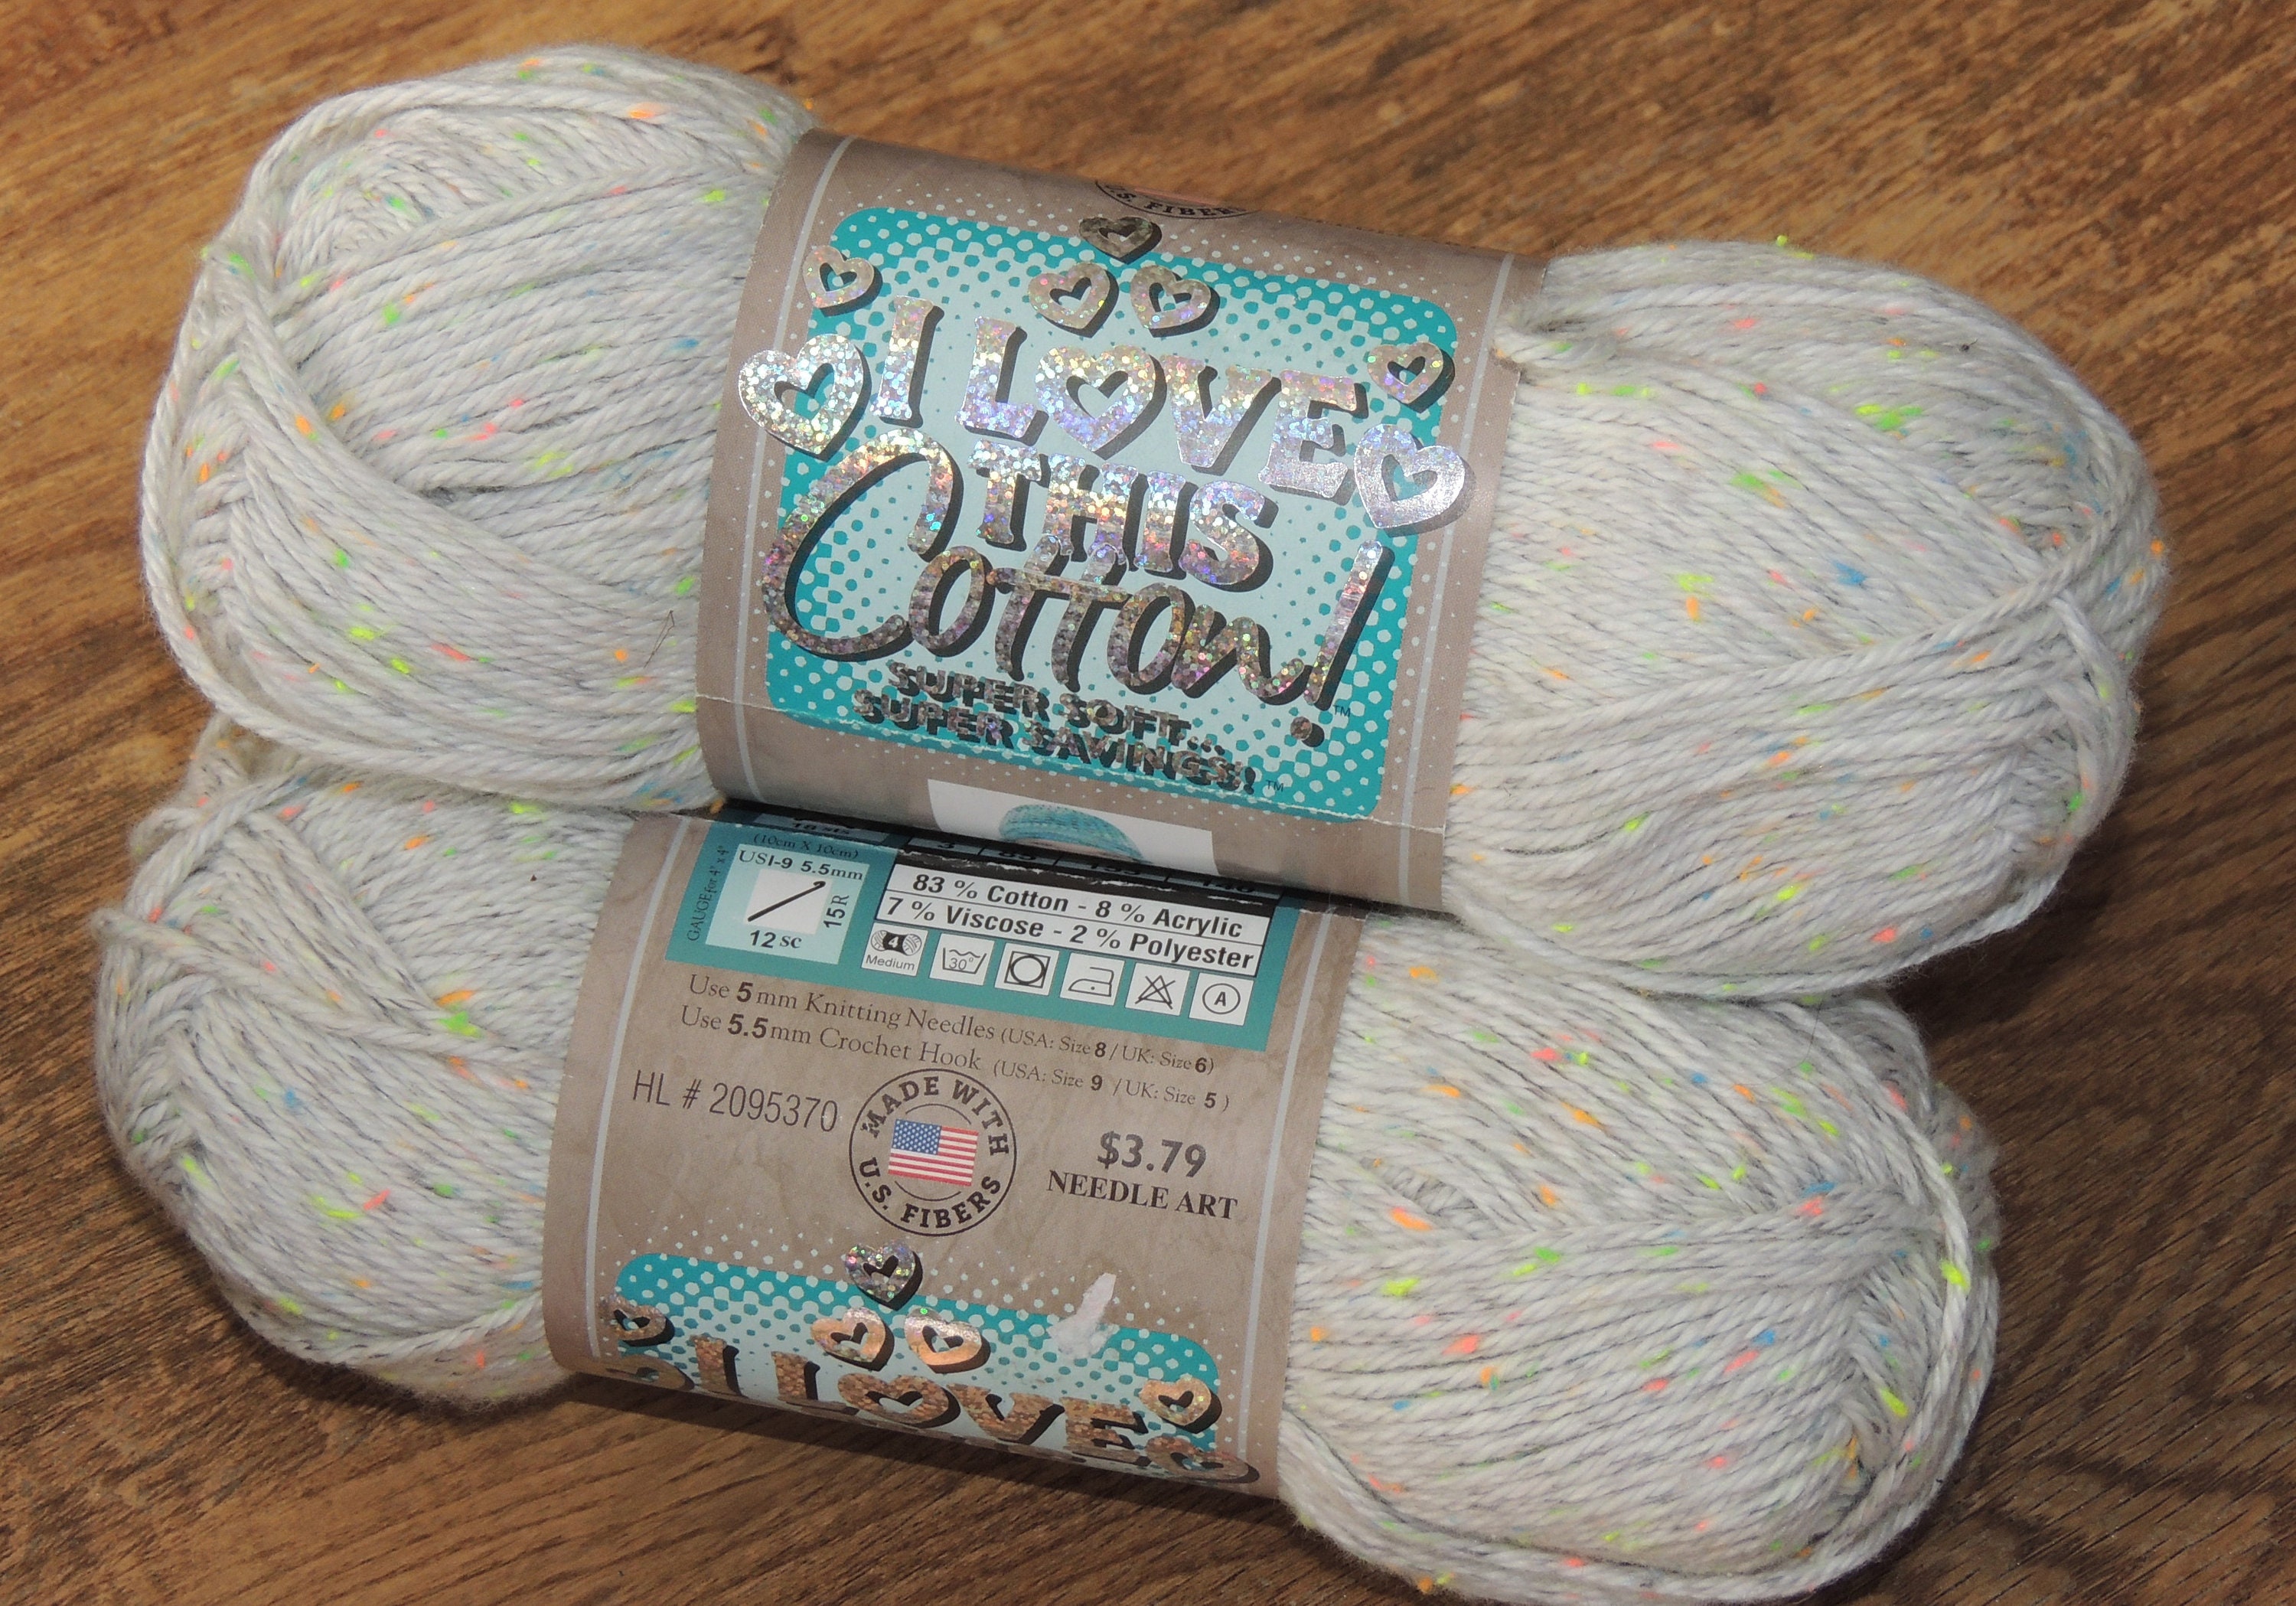 I Love This Cotton Yarn in Royalty 